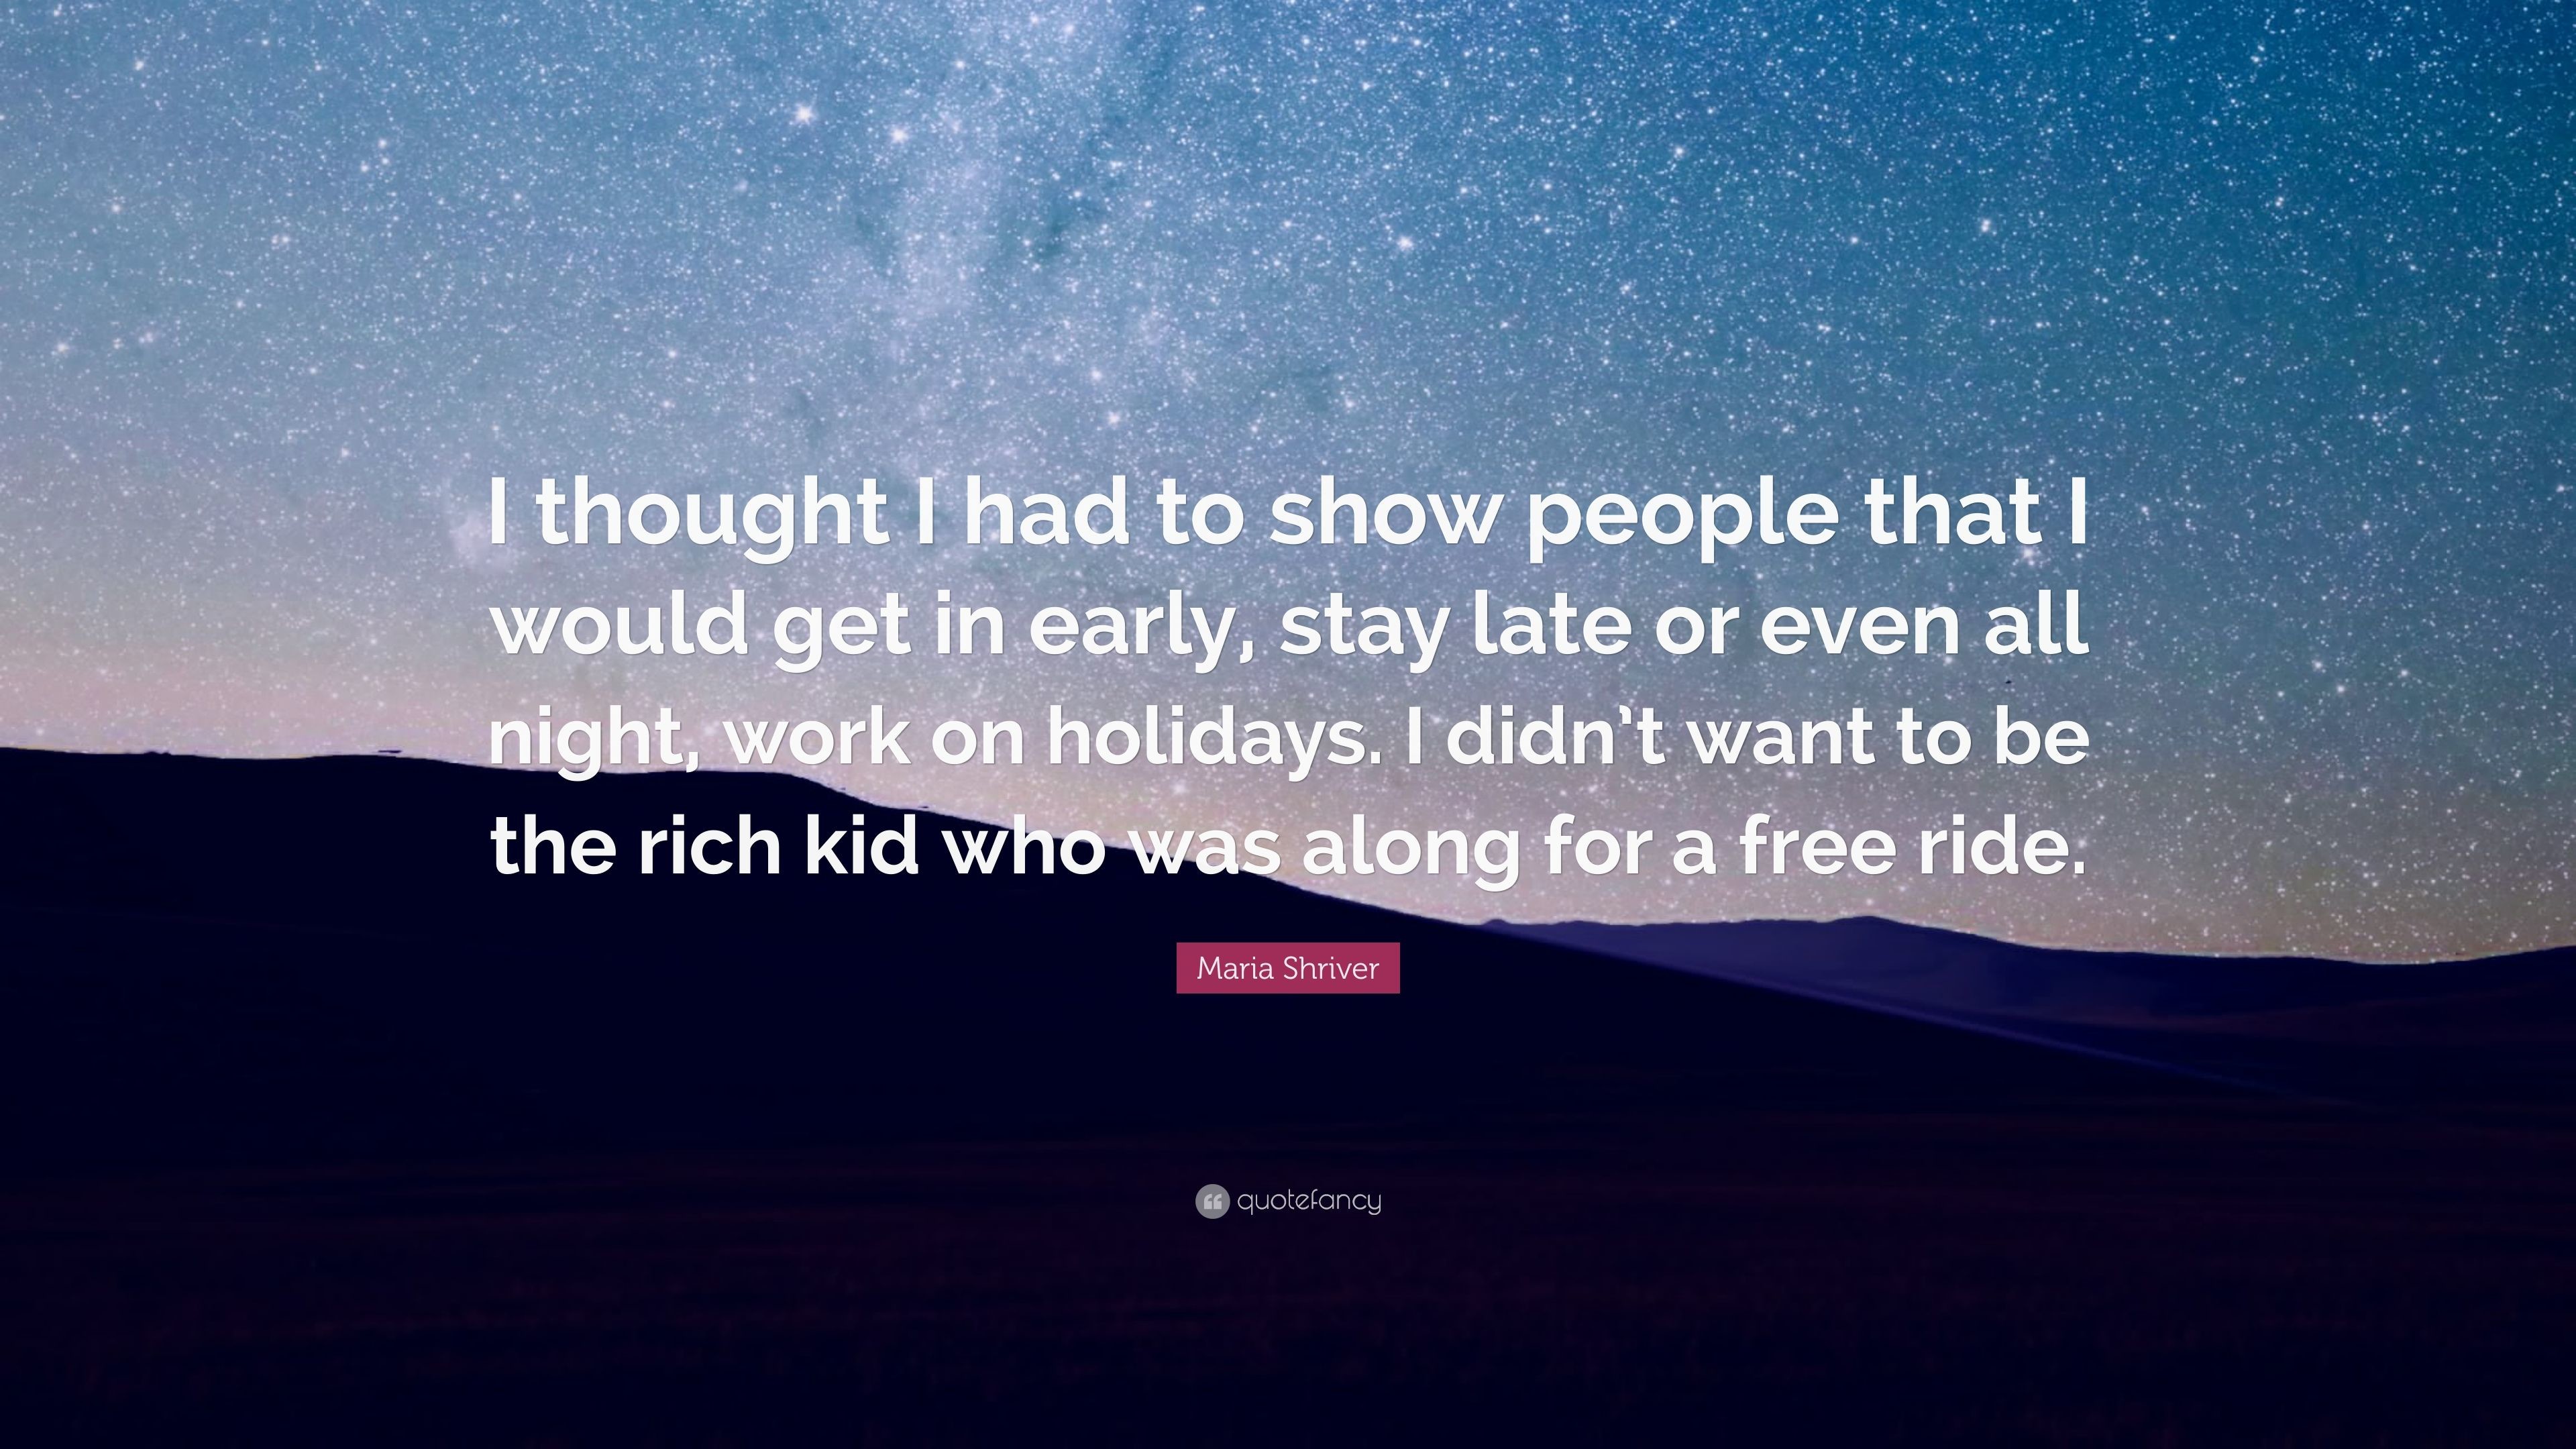 3840x2160 Maria Shriver Quote: “I thought I had to show people that I would get